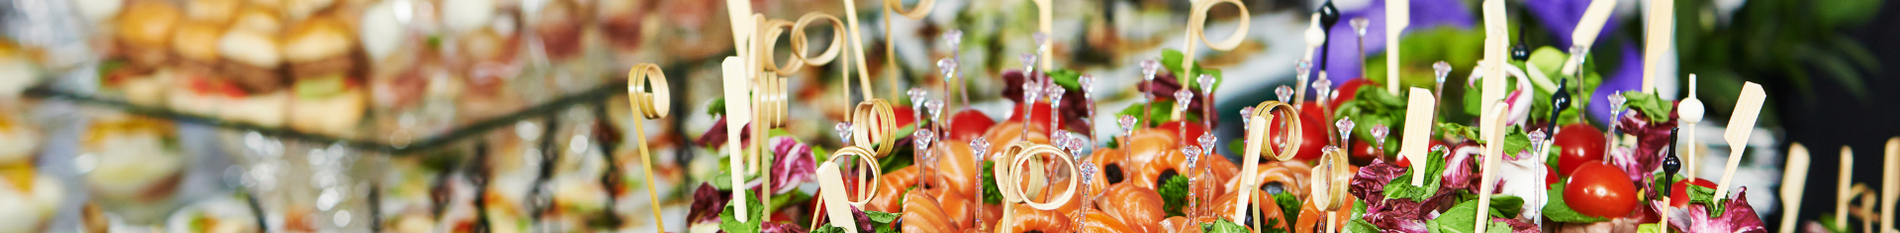 Blog-Banner-10-tips-for-eco-friendly-catering-fashionforfood